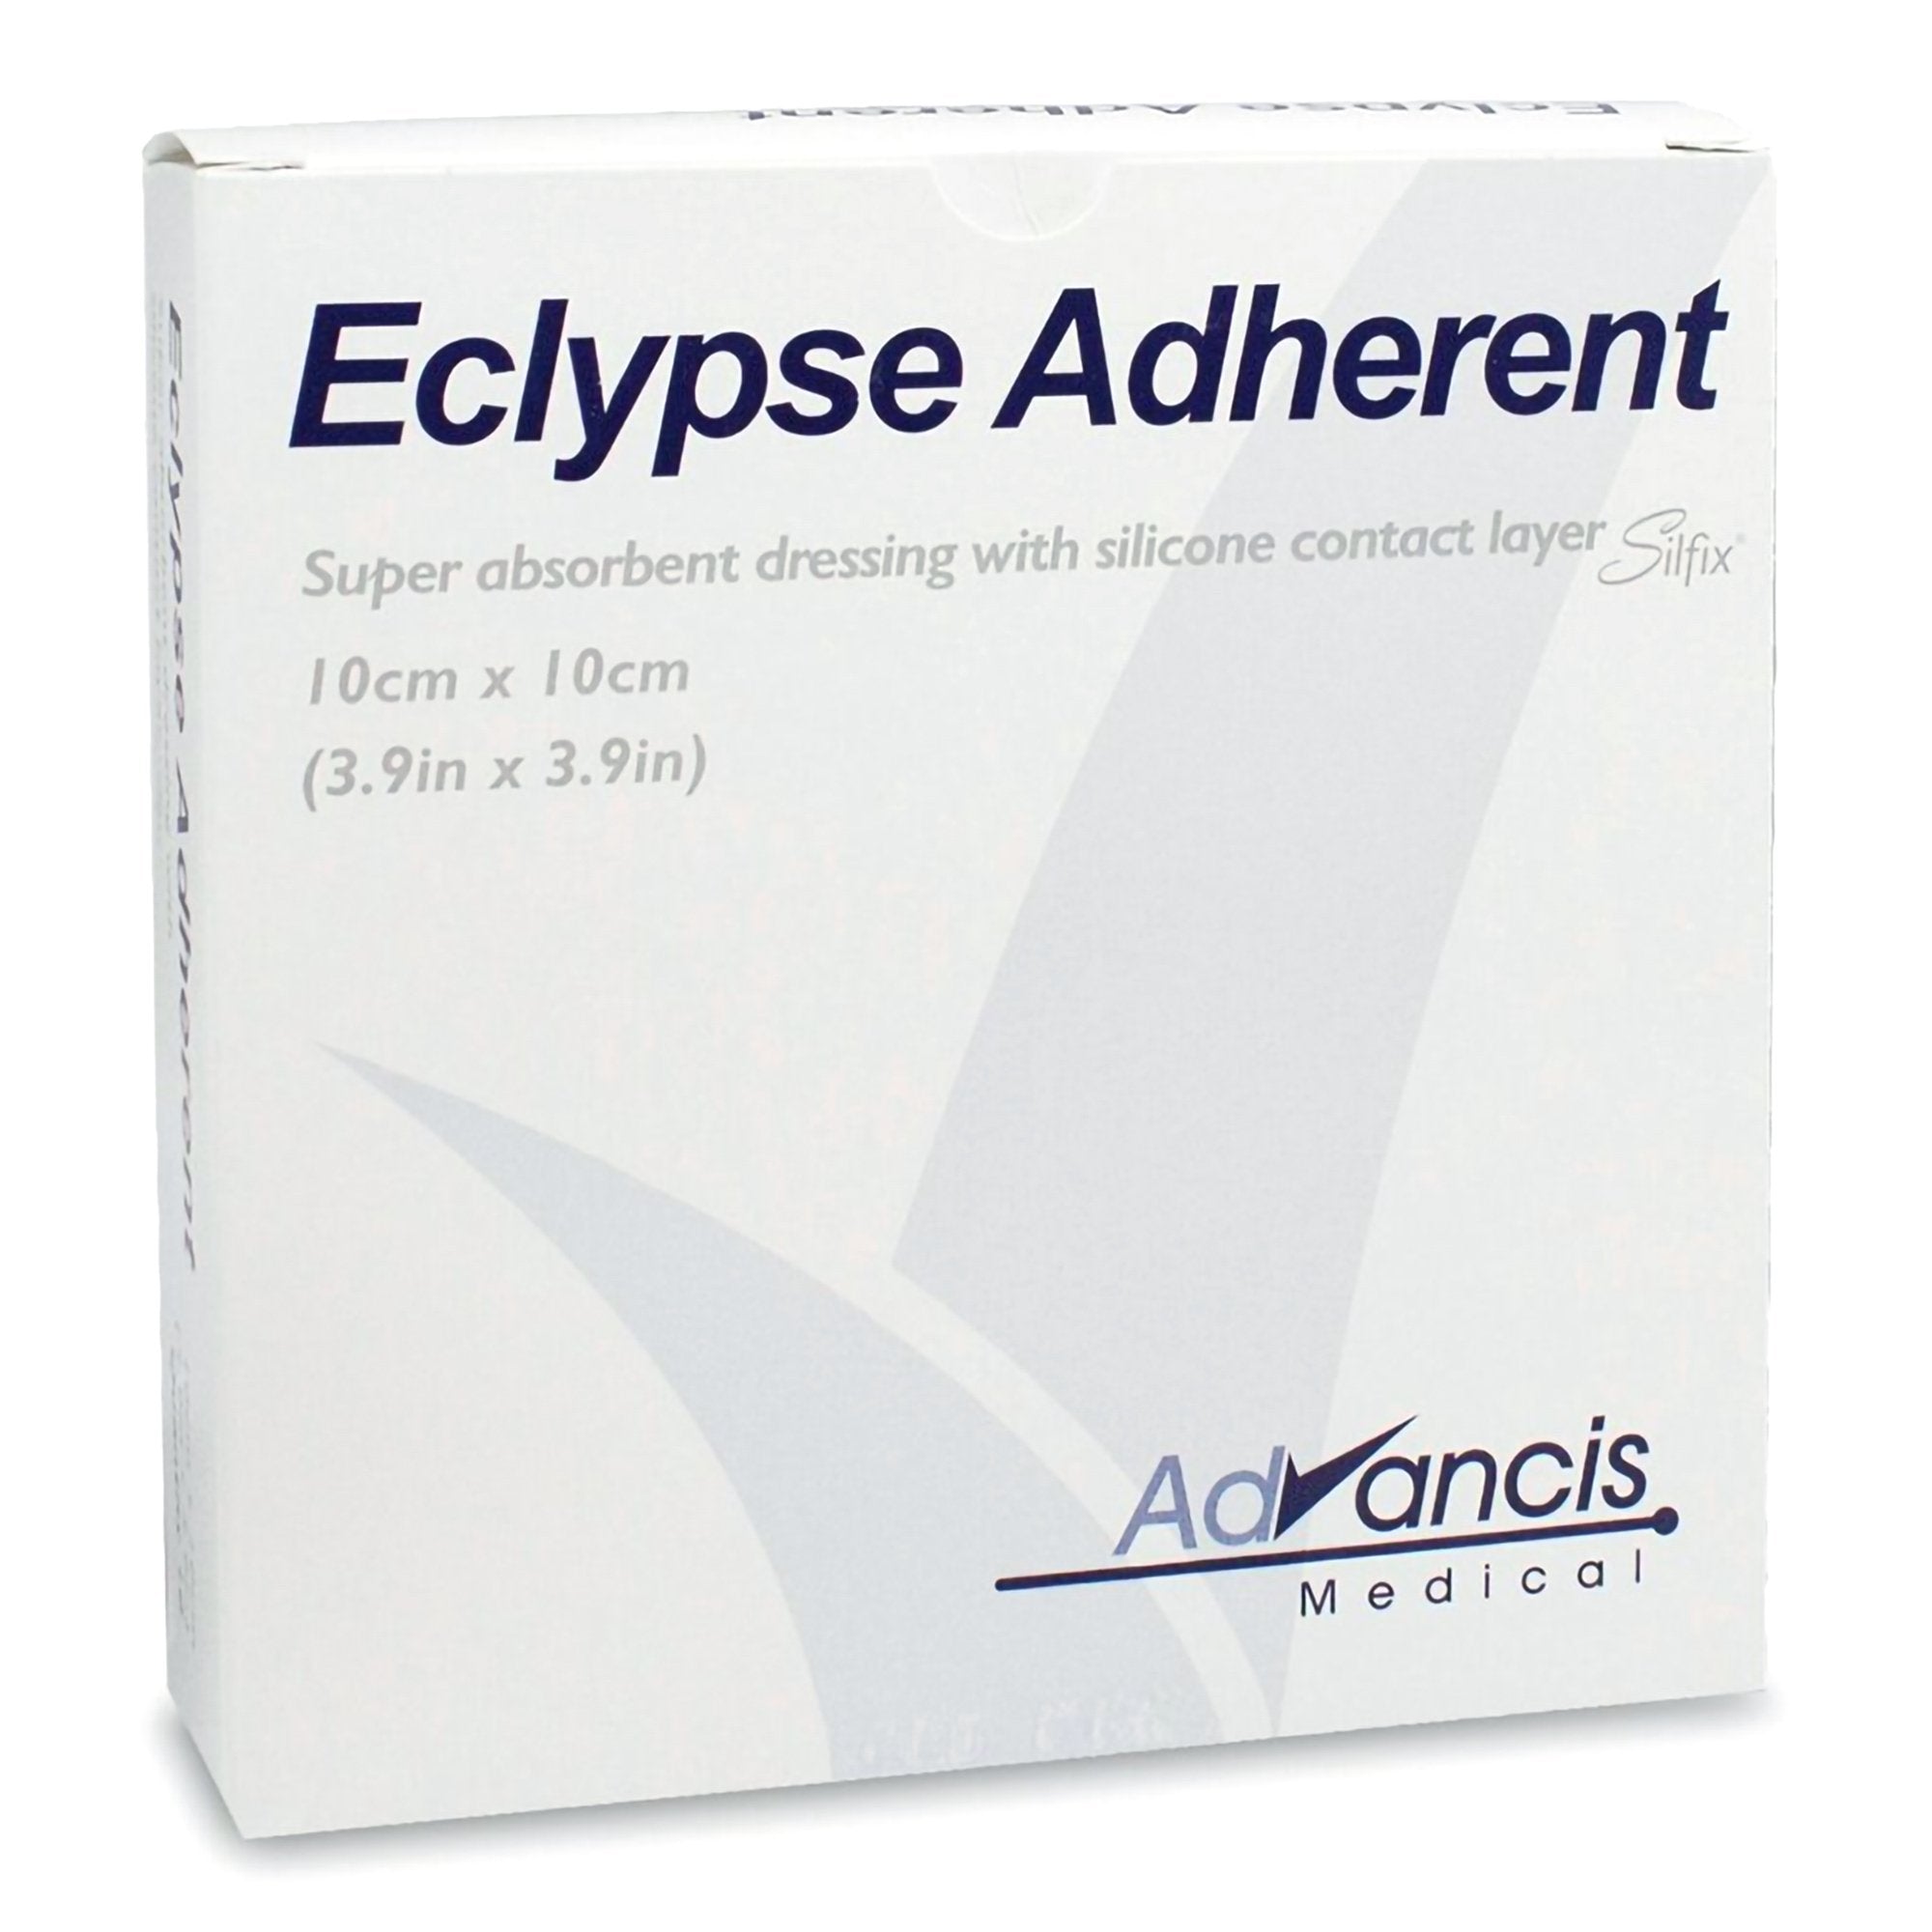 Super Absorbent Dressing Eclypse® Adherent 4 X 4 Inch Square